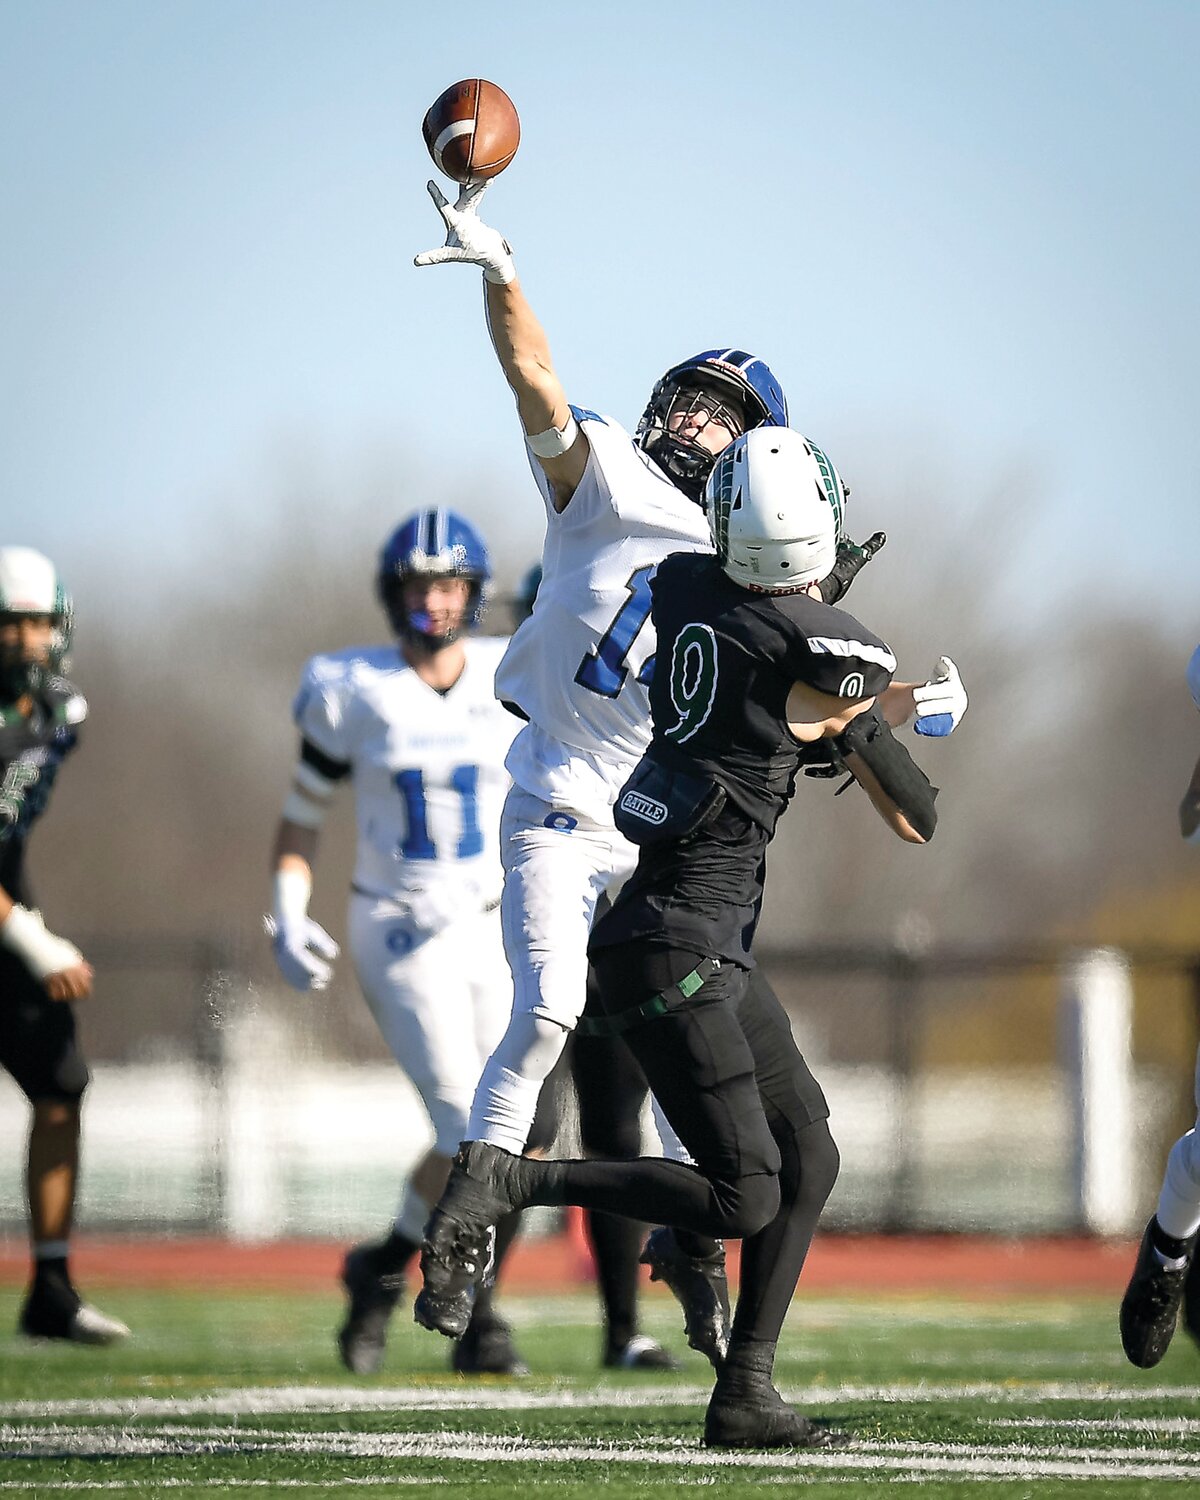 Quakertown’s Reagan Payne just gets a hand on the ball to tip a pass attempt to Pennridge’s Joe Gregorie.